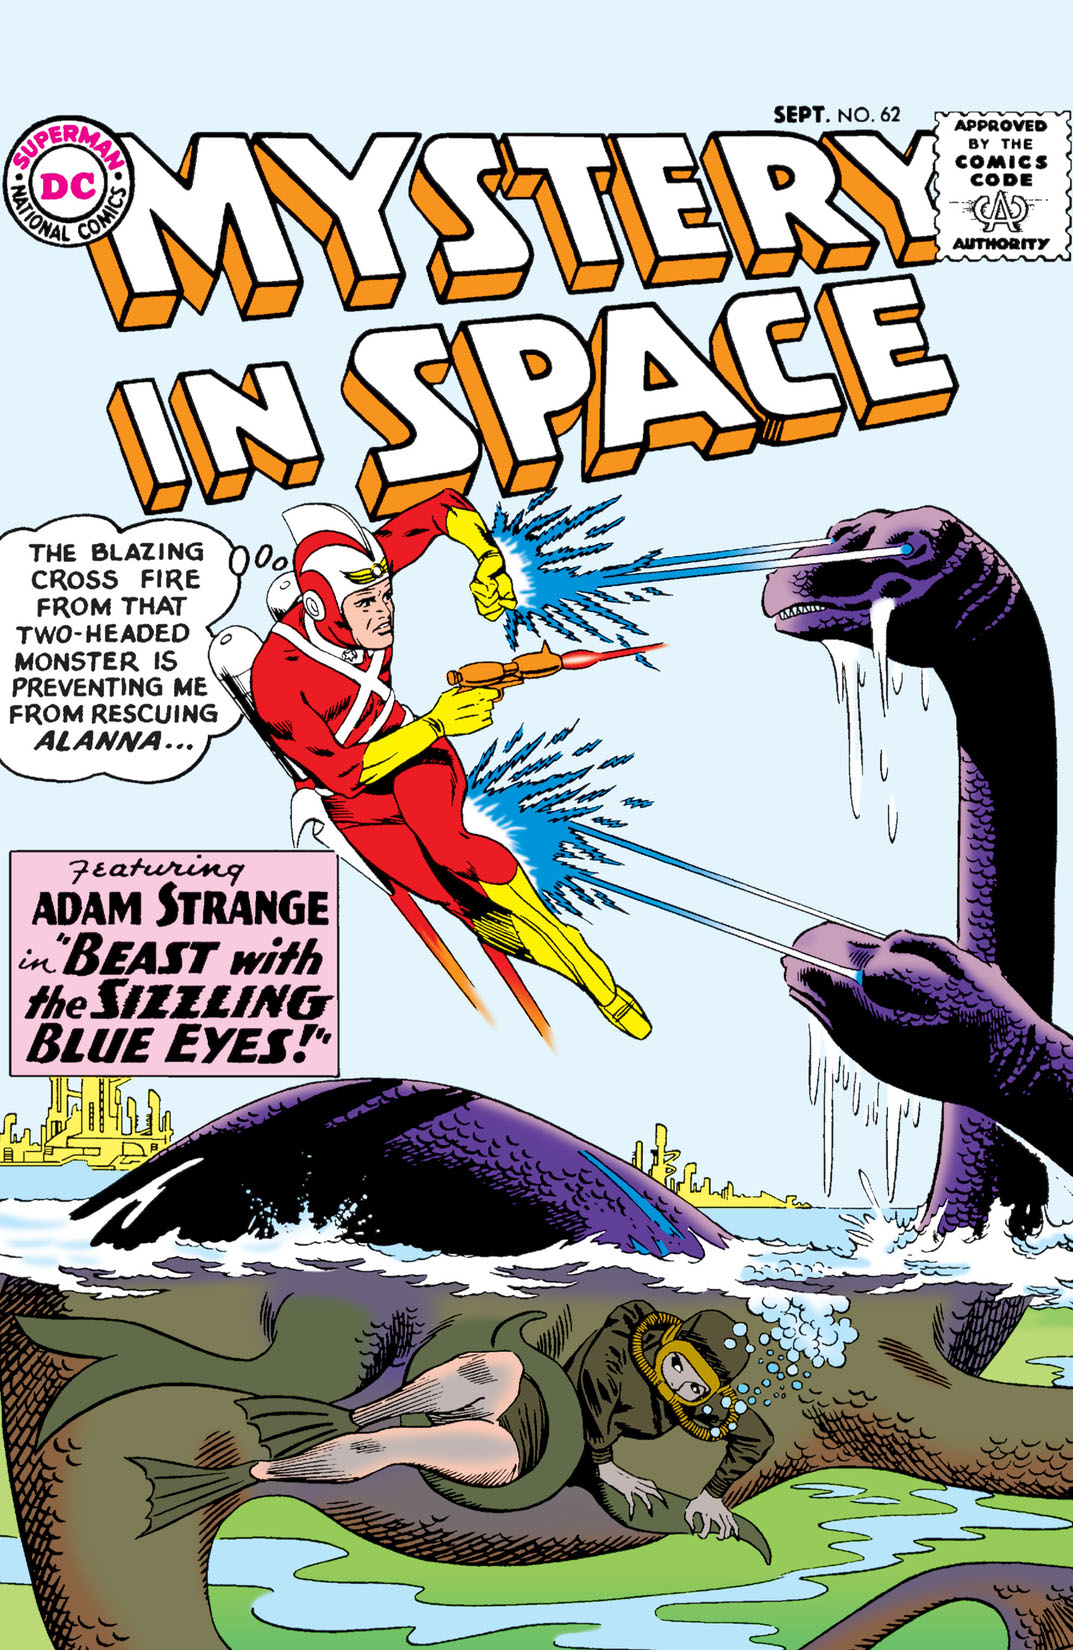 Mystery in Space (1951-) #62 preview images